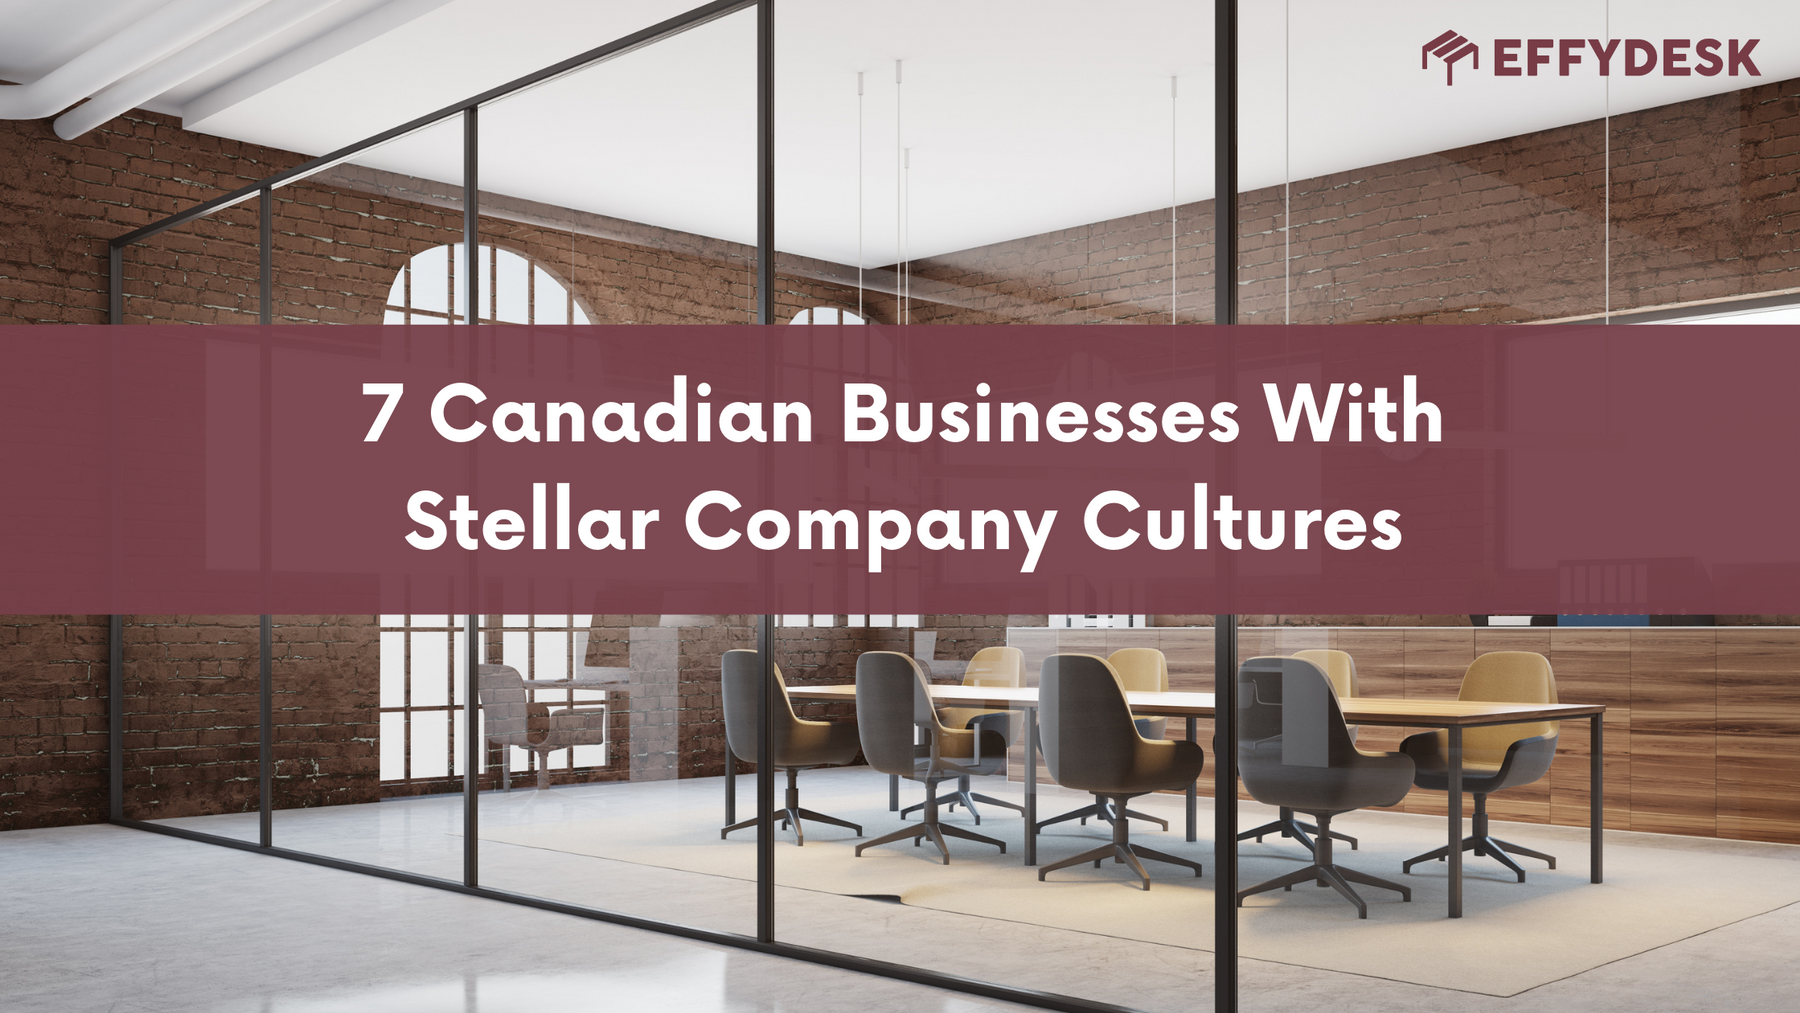 7 Canadian Businesses With Stellar Company Cultures